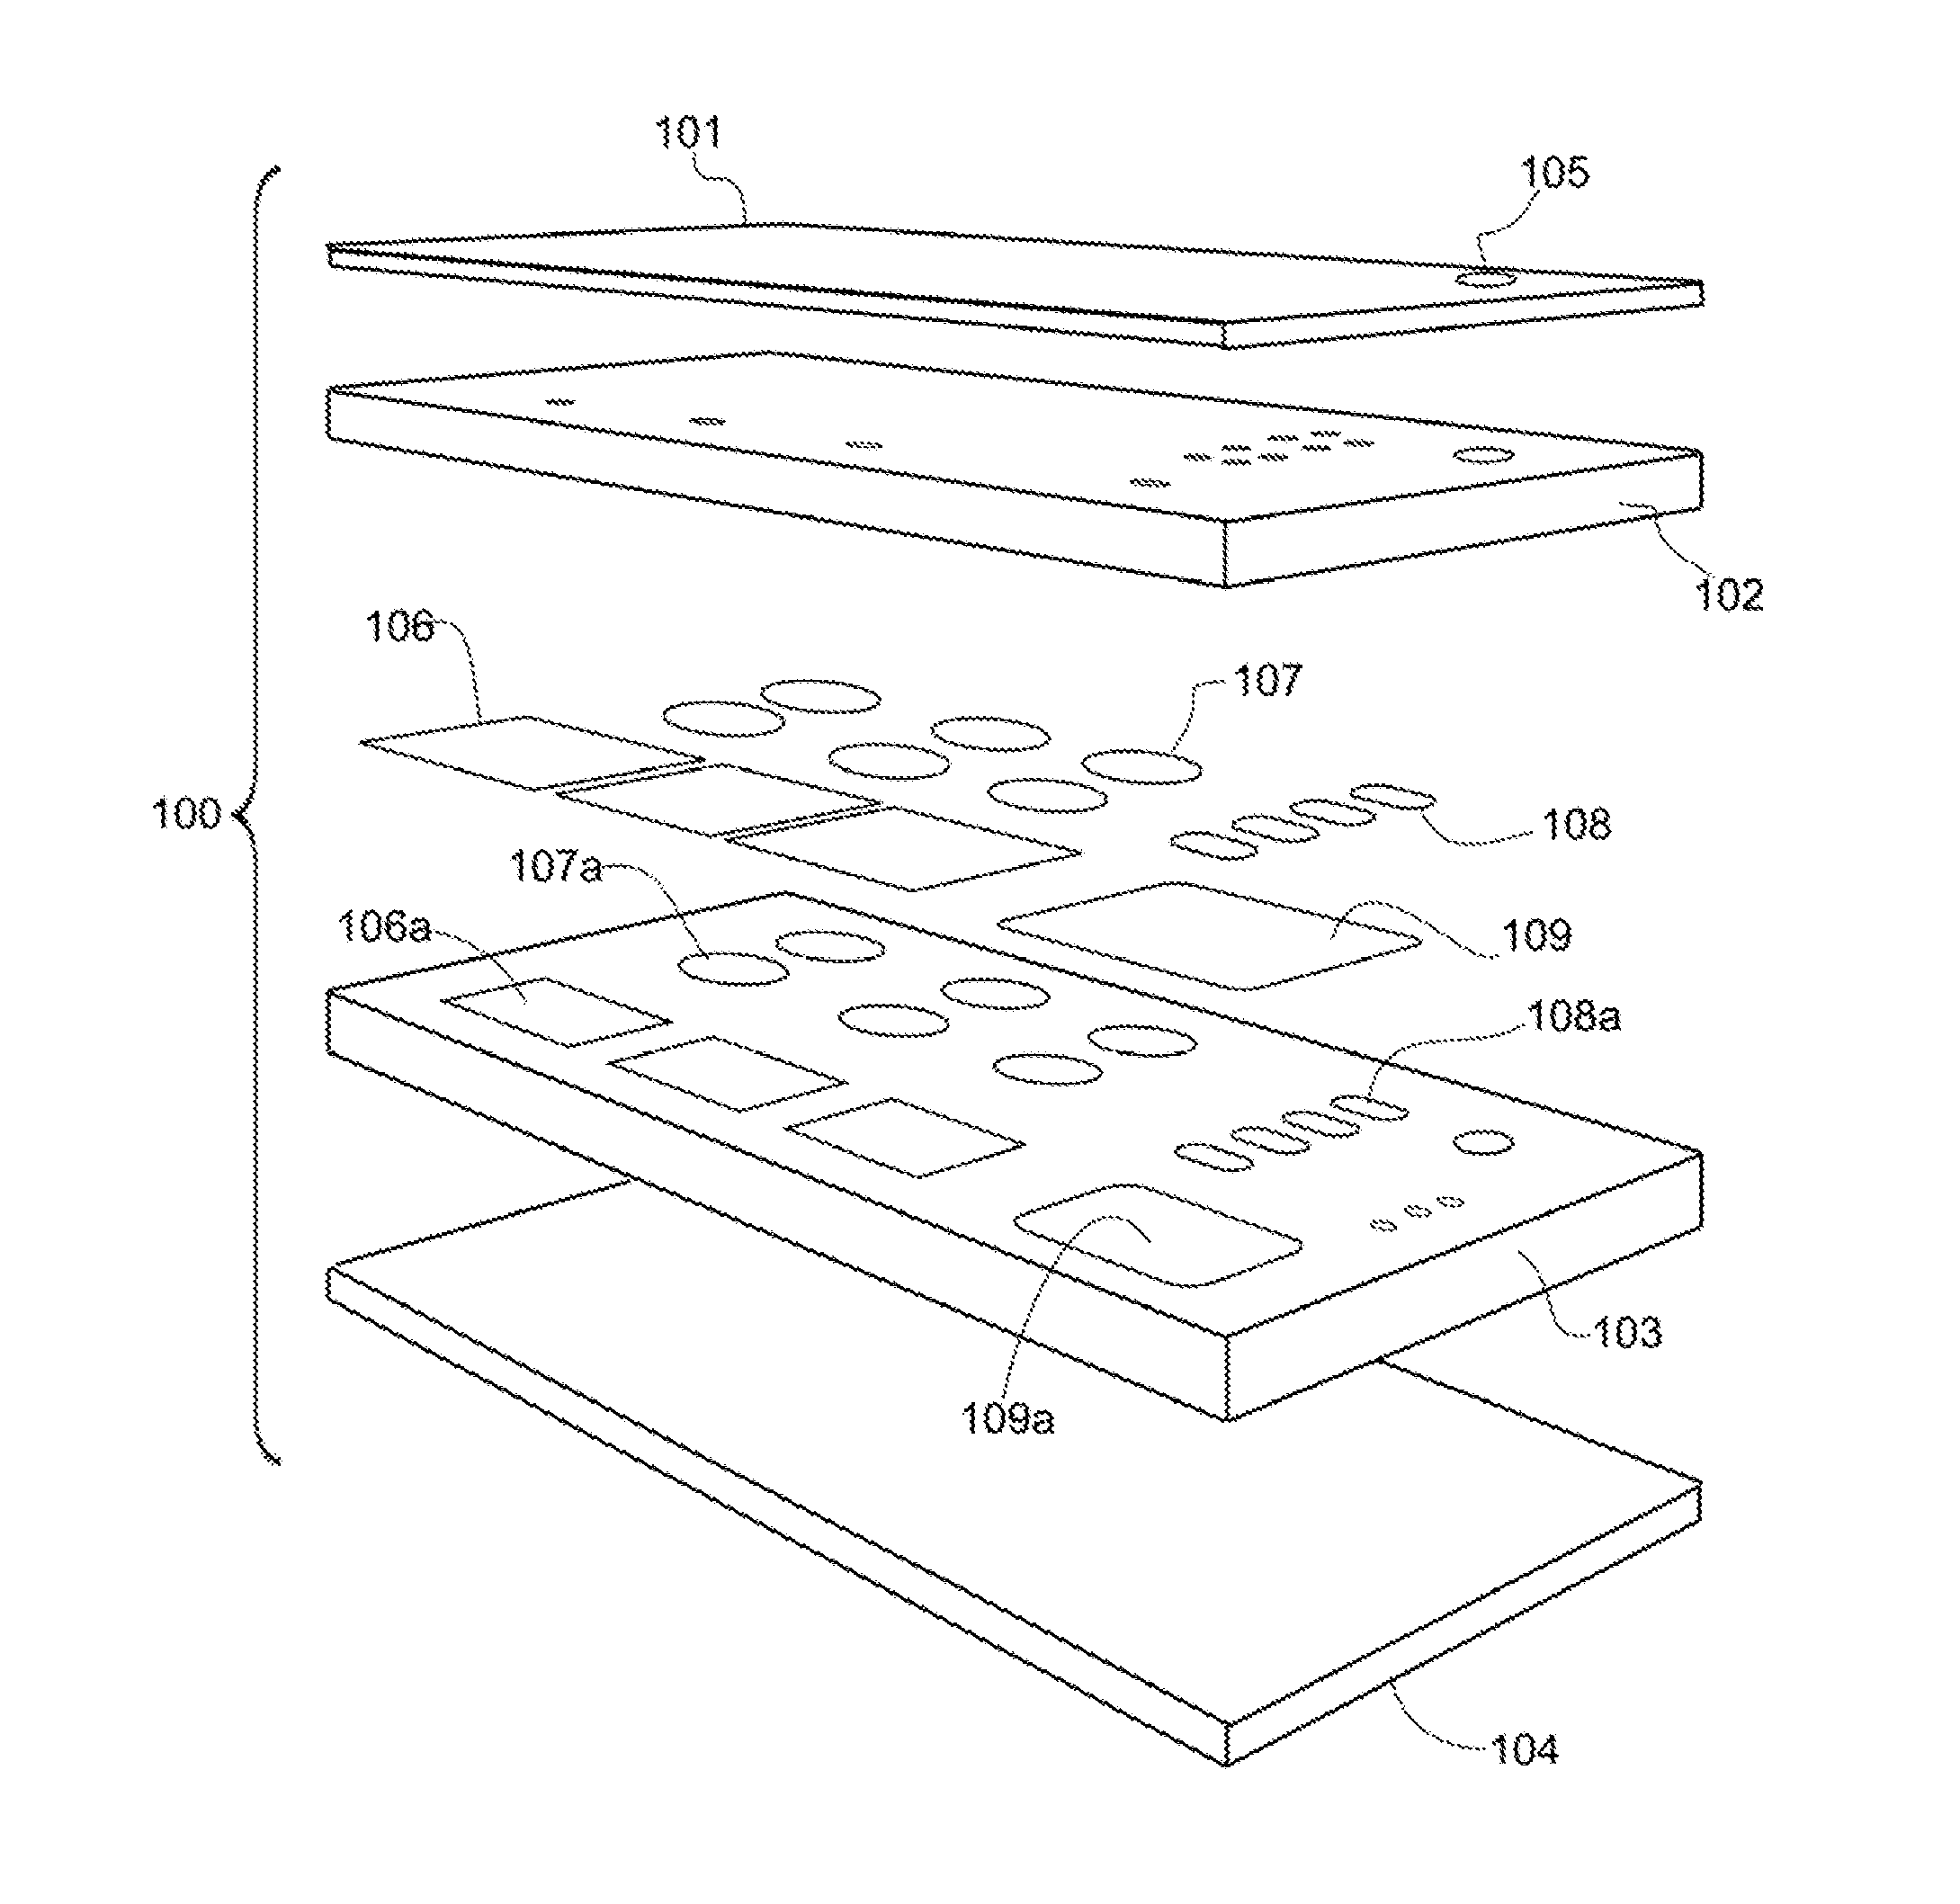 Fluidic circuits and related manufacturing methods